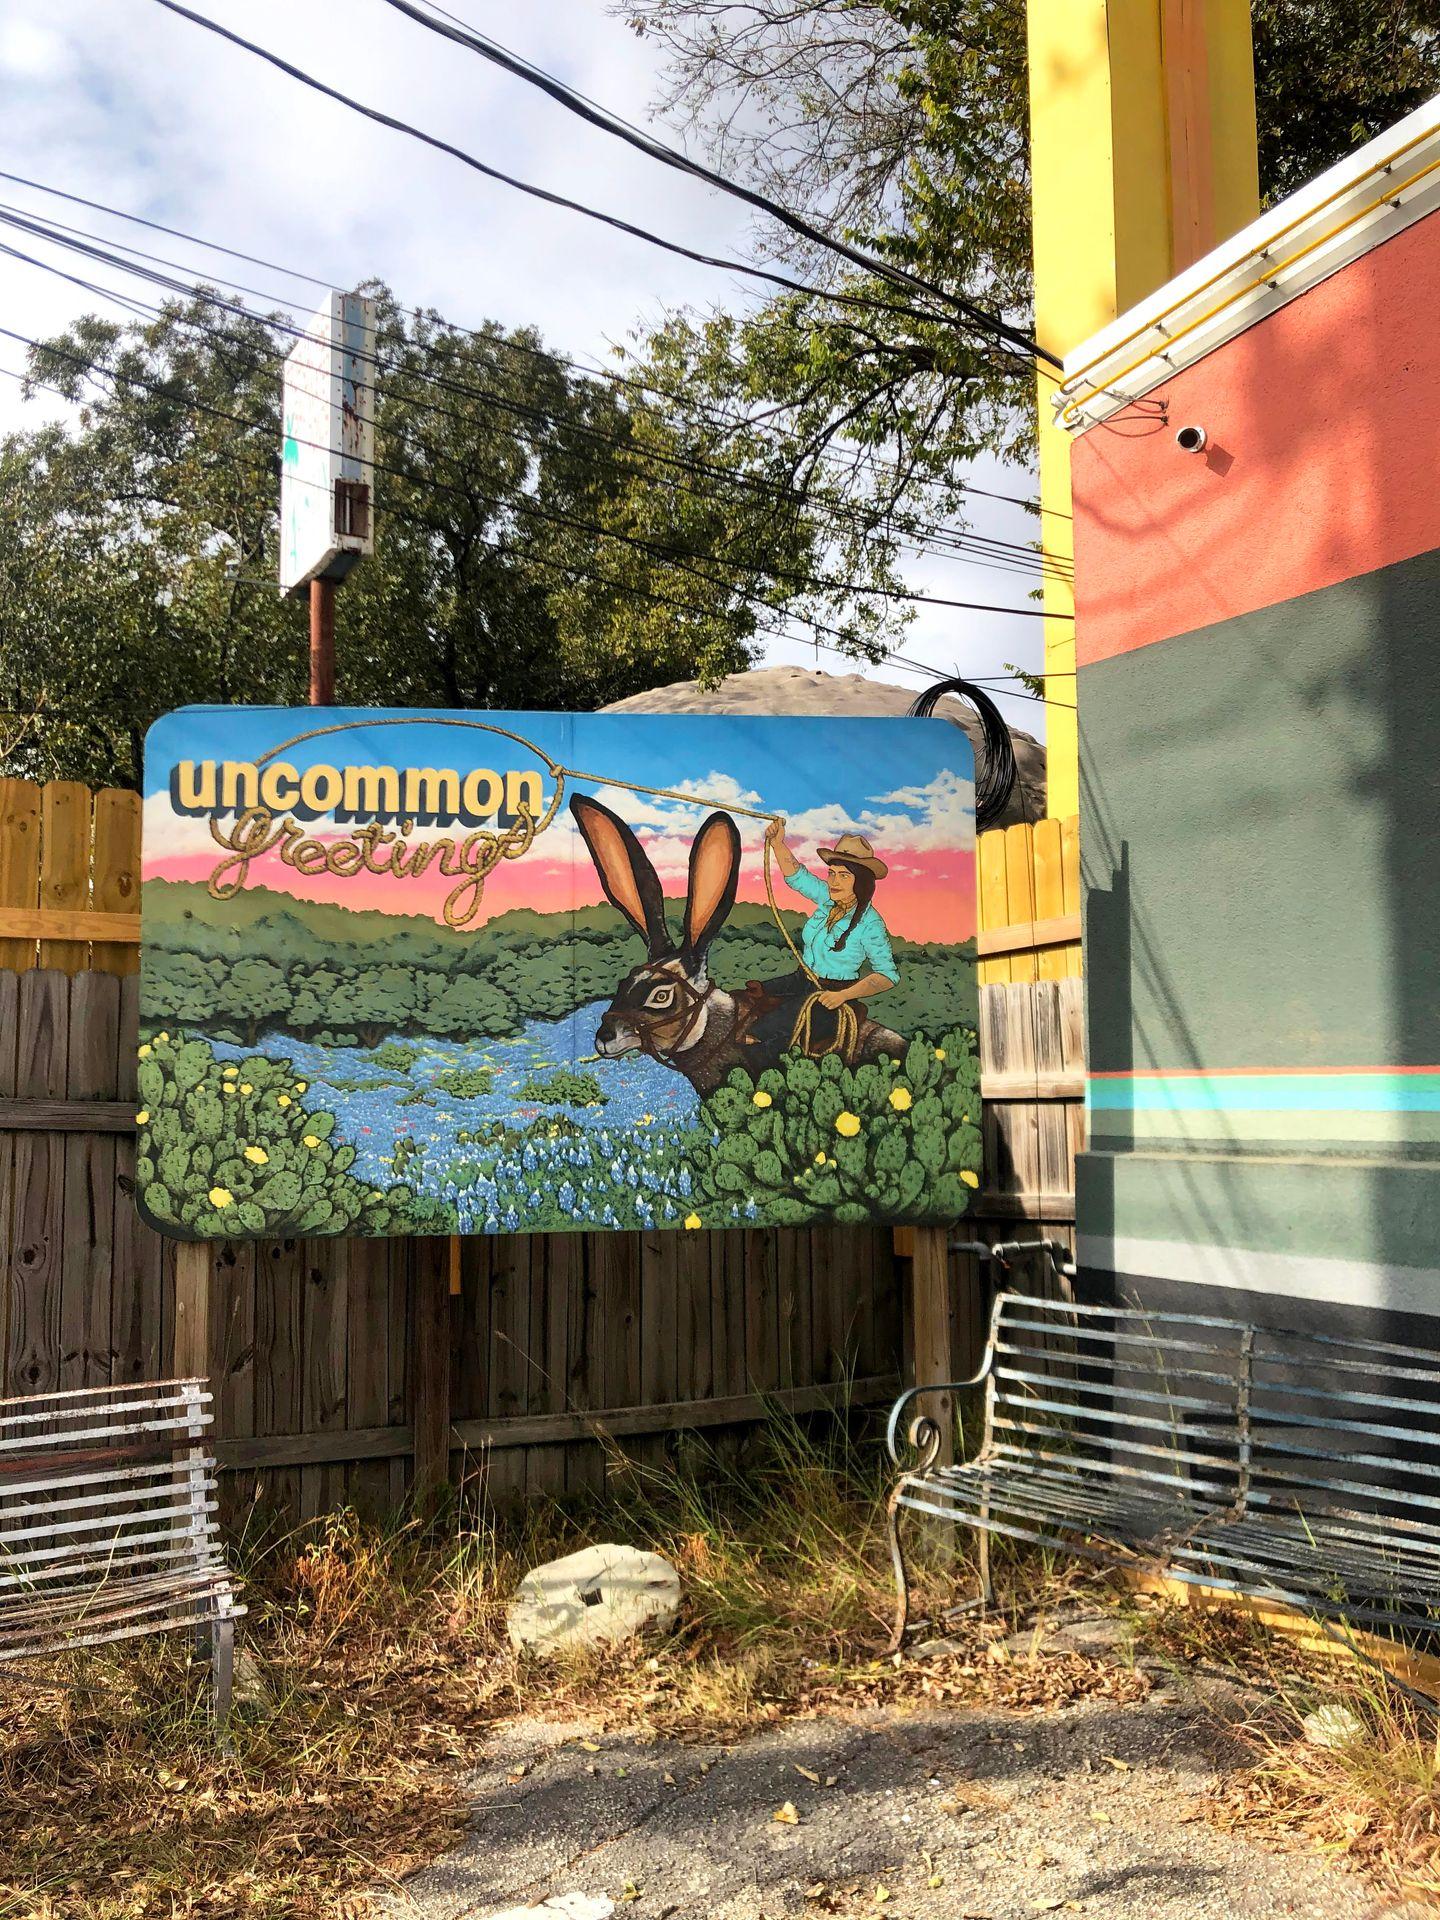 A painted sign outside of Uncomming Objects of someone riding a bunny.